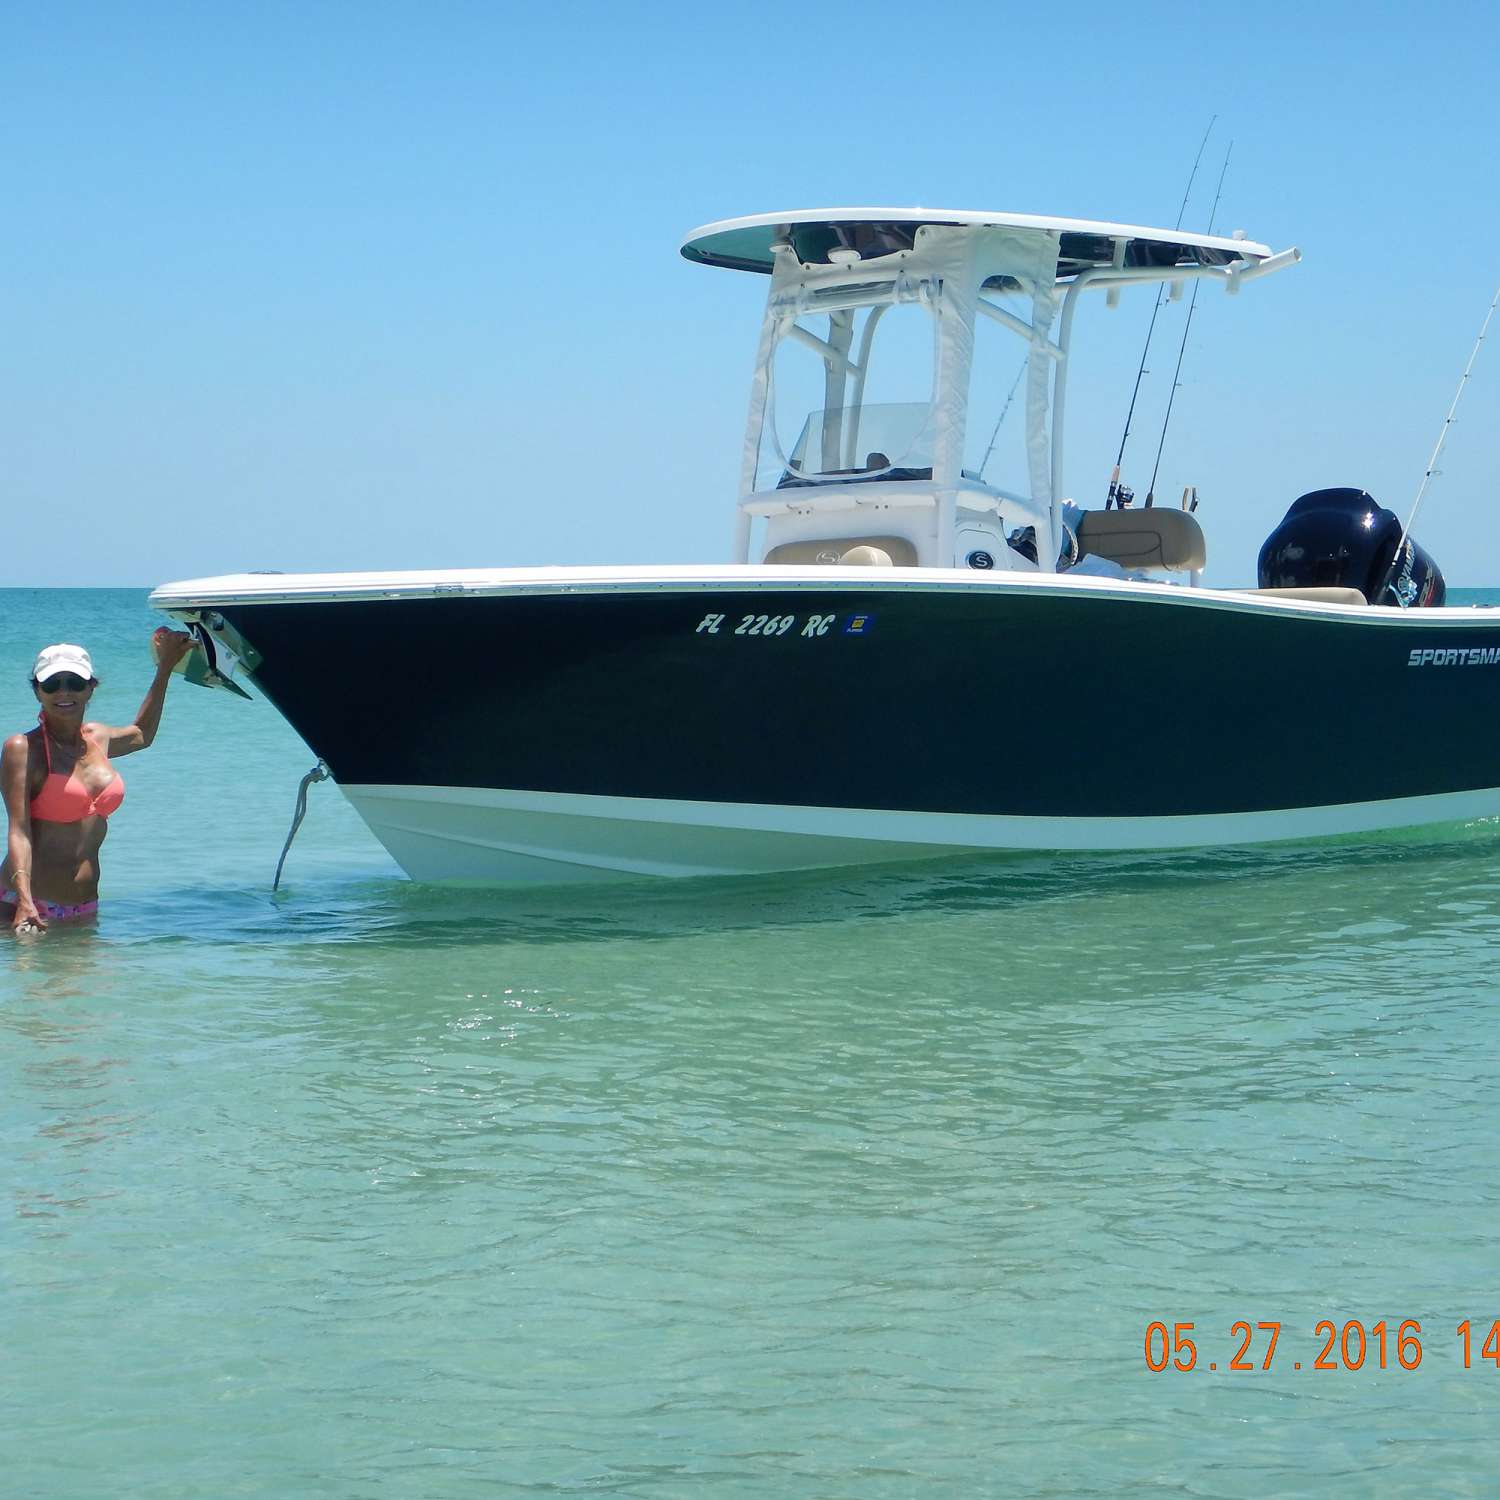 Photo was taken at Sanibel Island, Fl  May 27, 2016.  It is a Sportsman 232 Open, 2016 with a V...